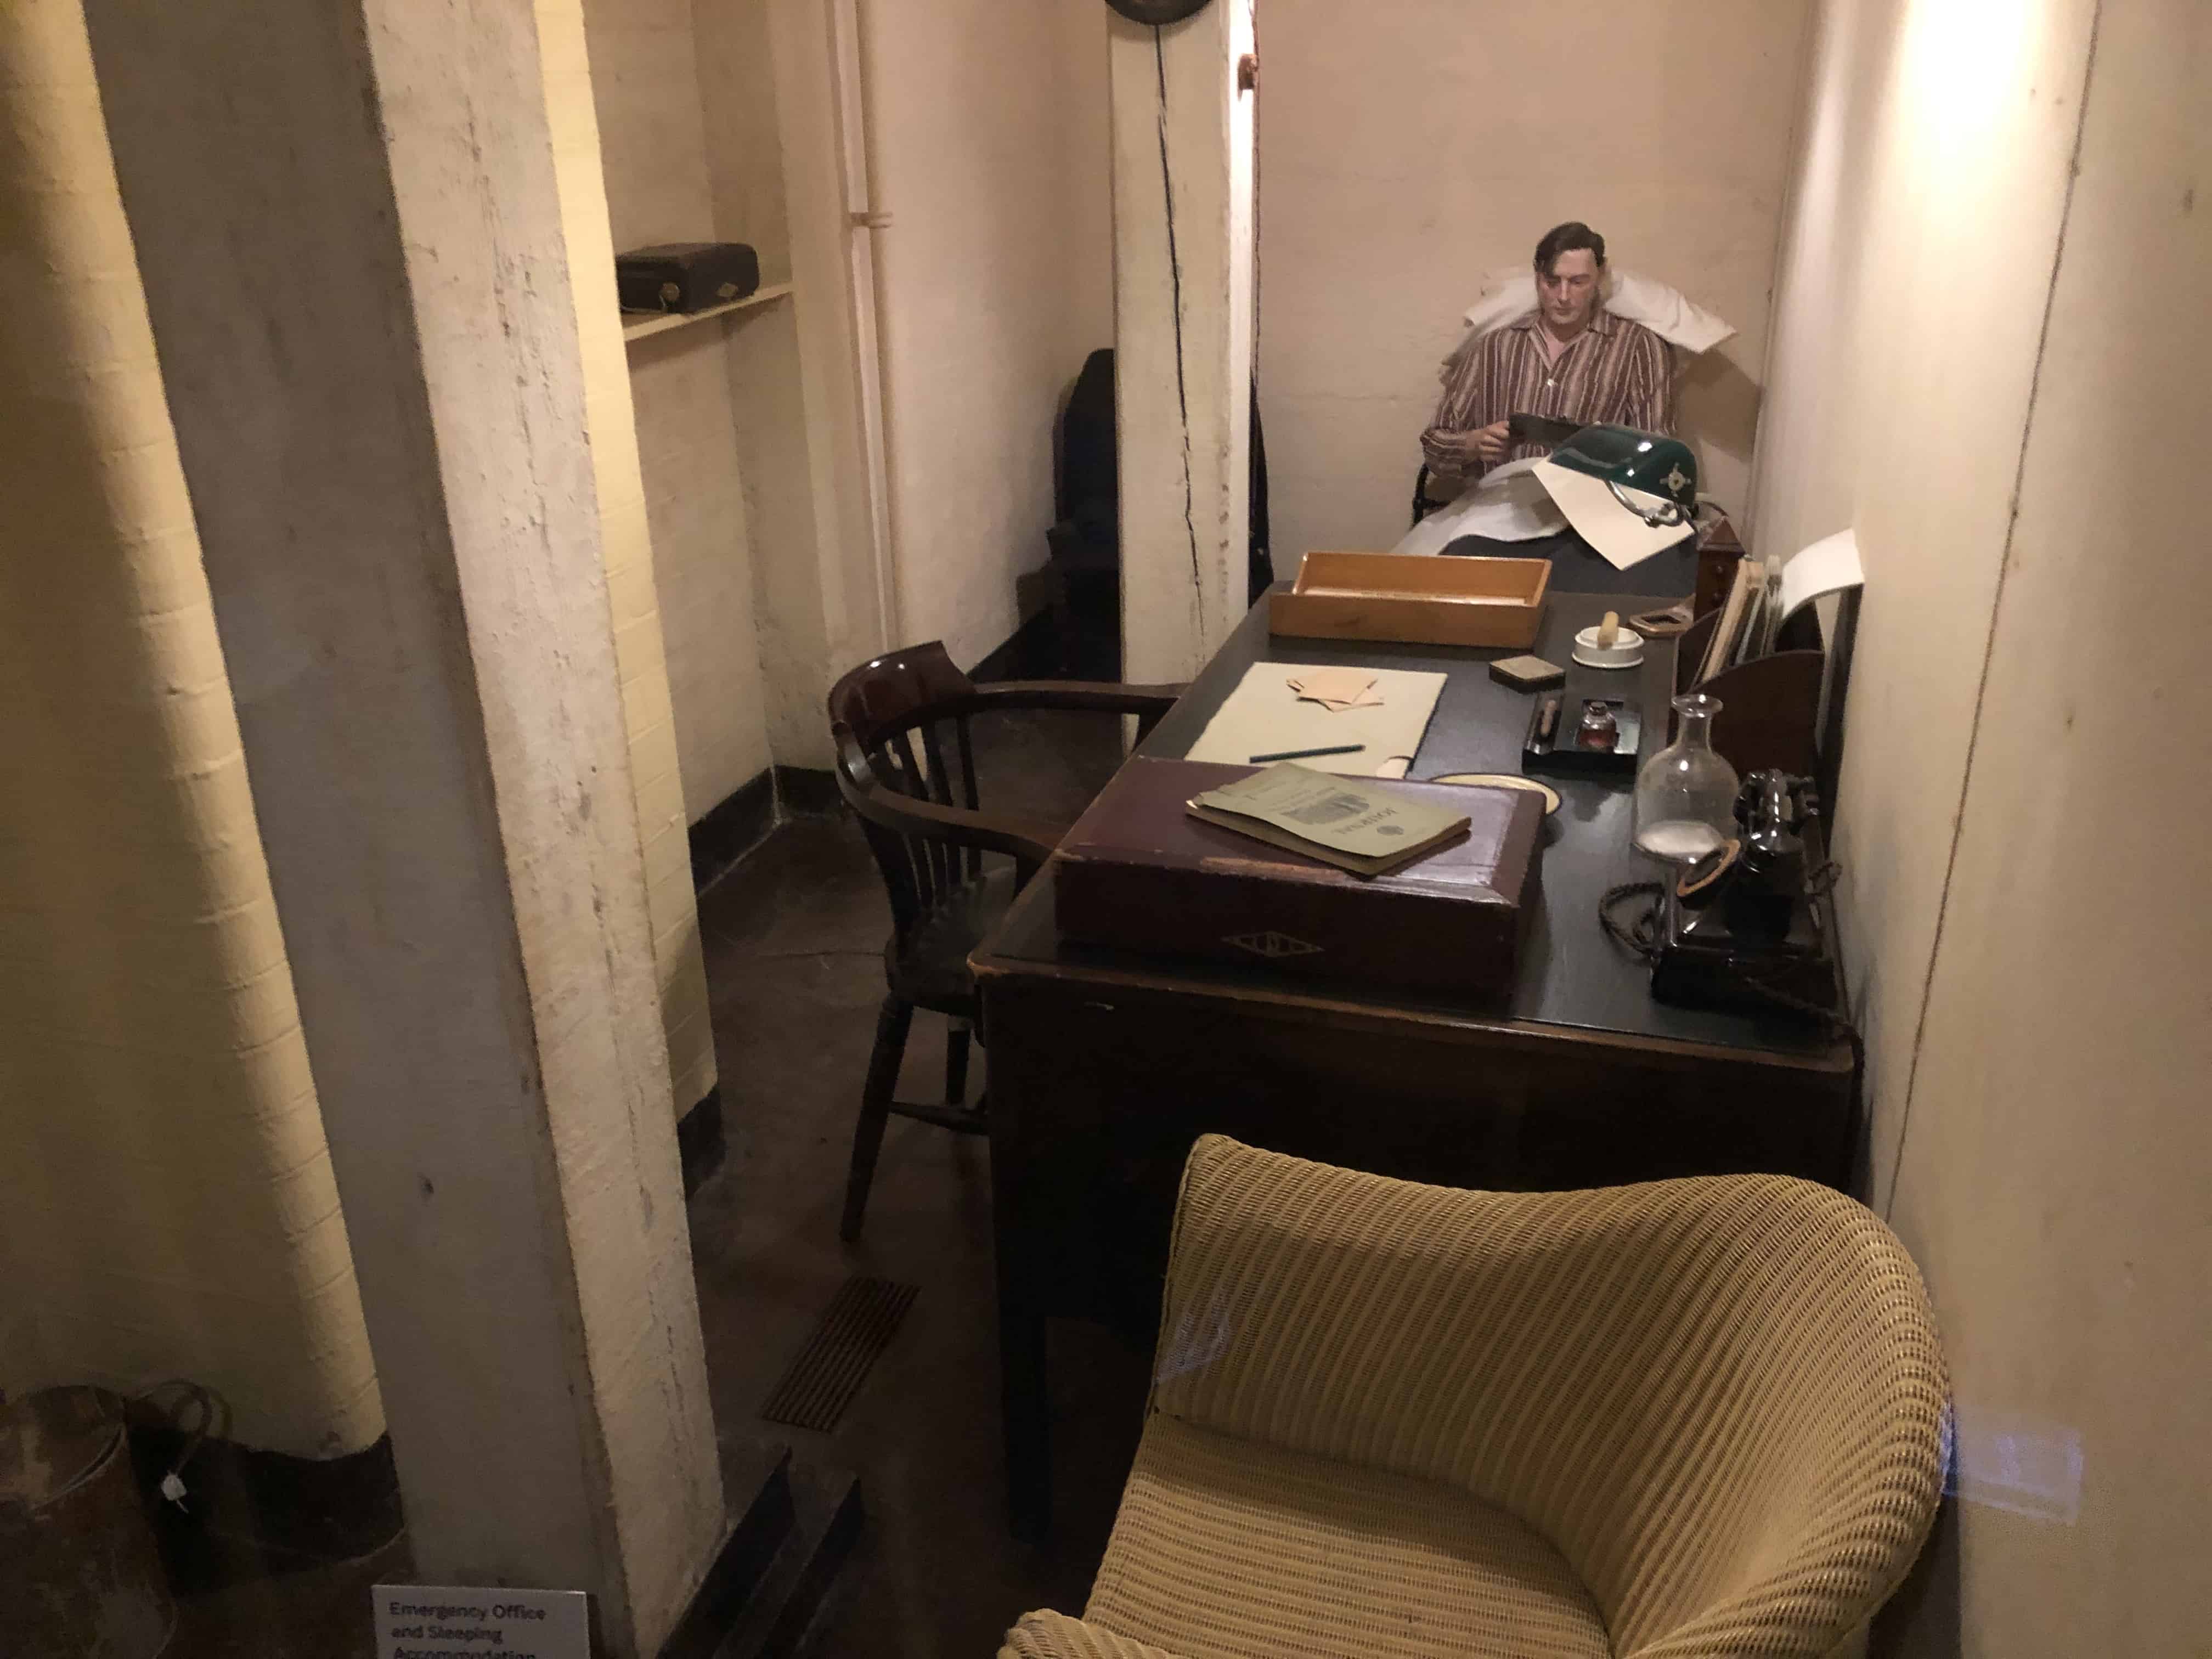 Emergency Office and Sleeping Accommodations at the Churchill War Rooms in London, England